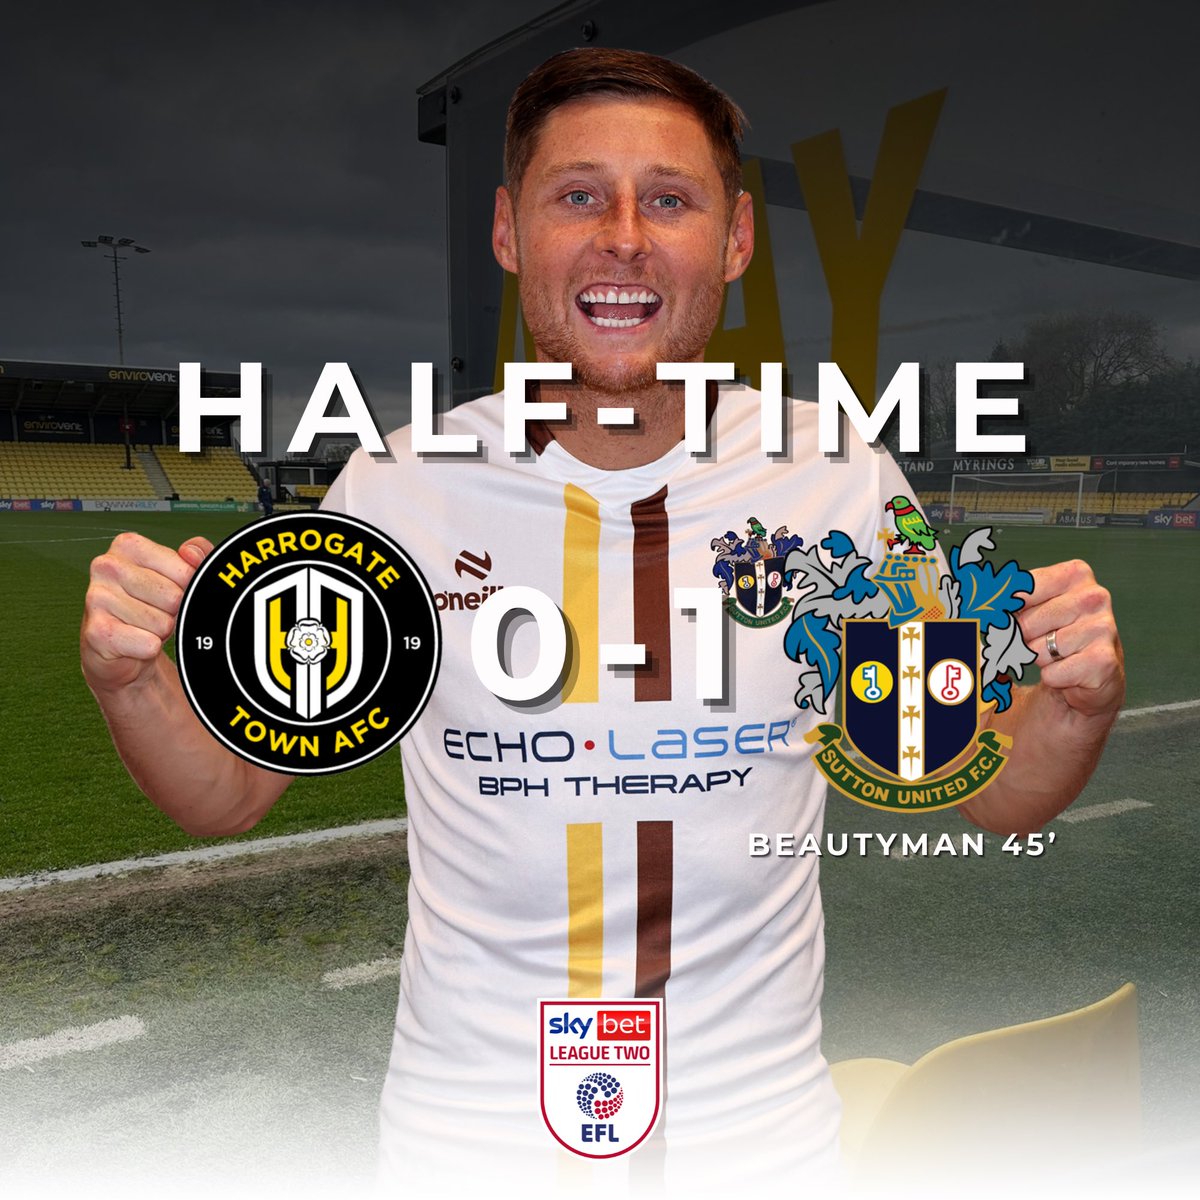 HT | 0-1 BOSH 💛 Right on 45 minutes we take a deserved lead through Beautyman. Keep going lads. #suttonunited